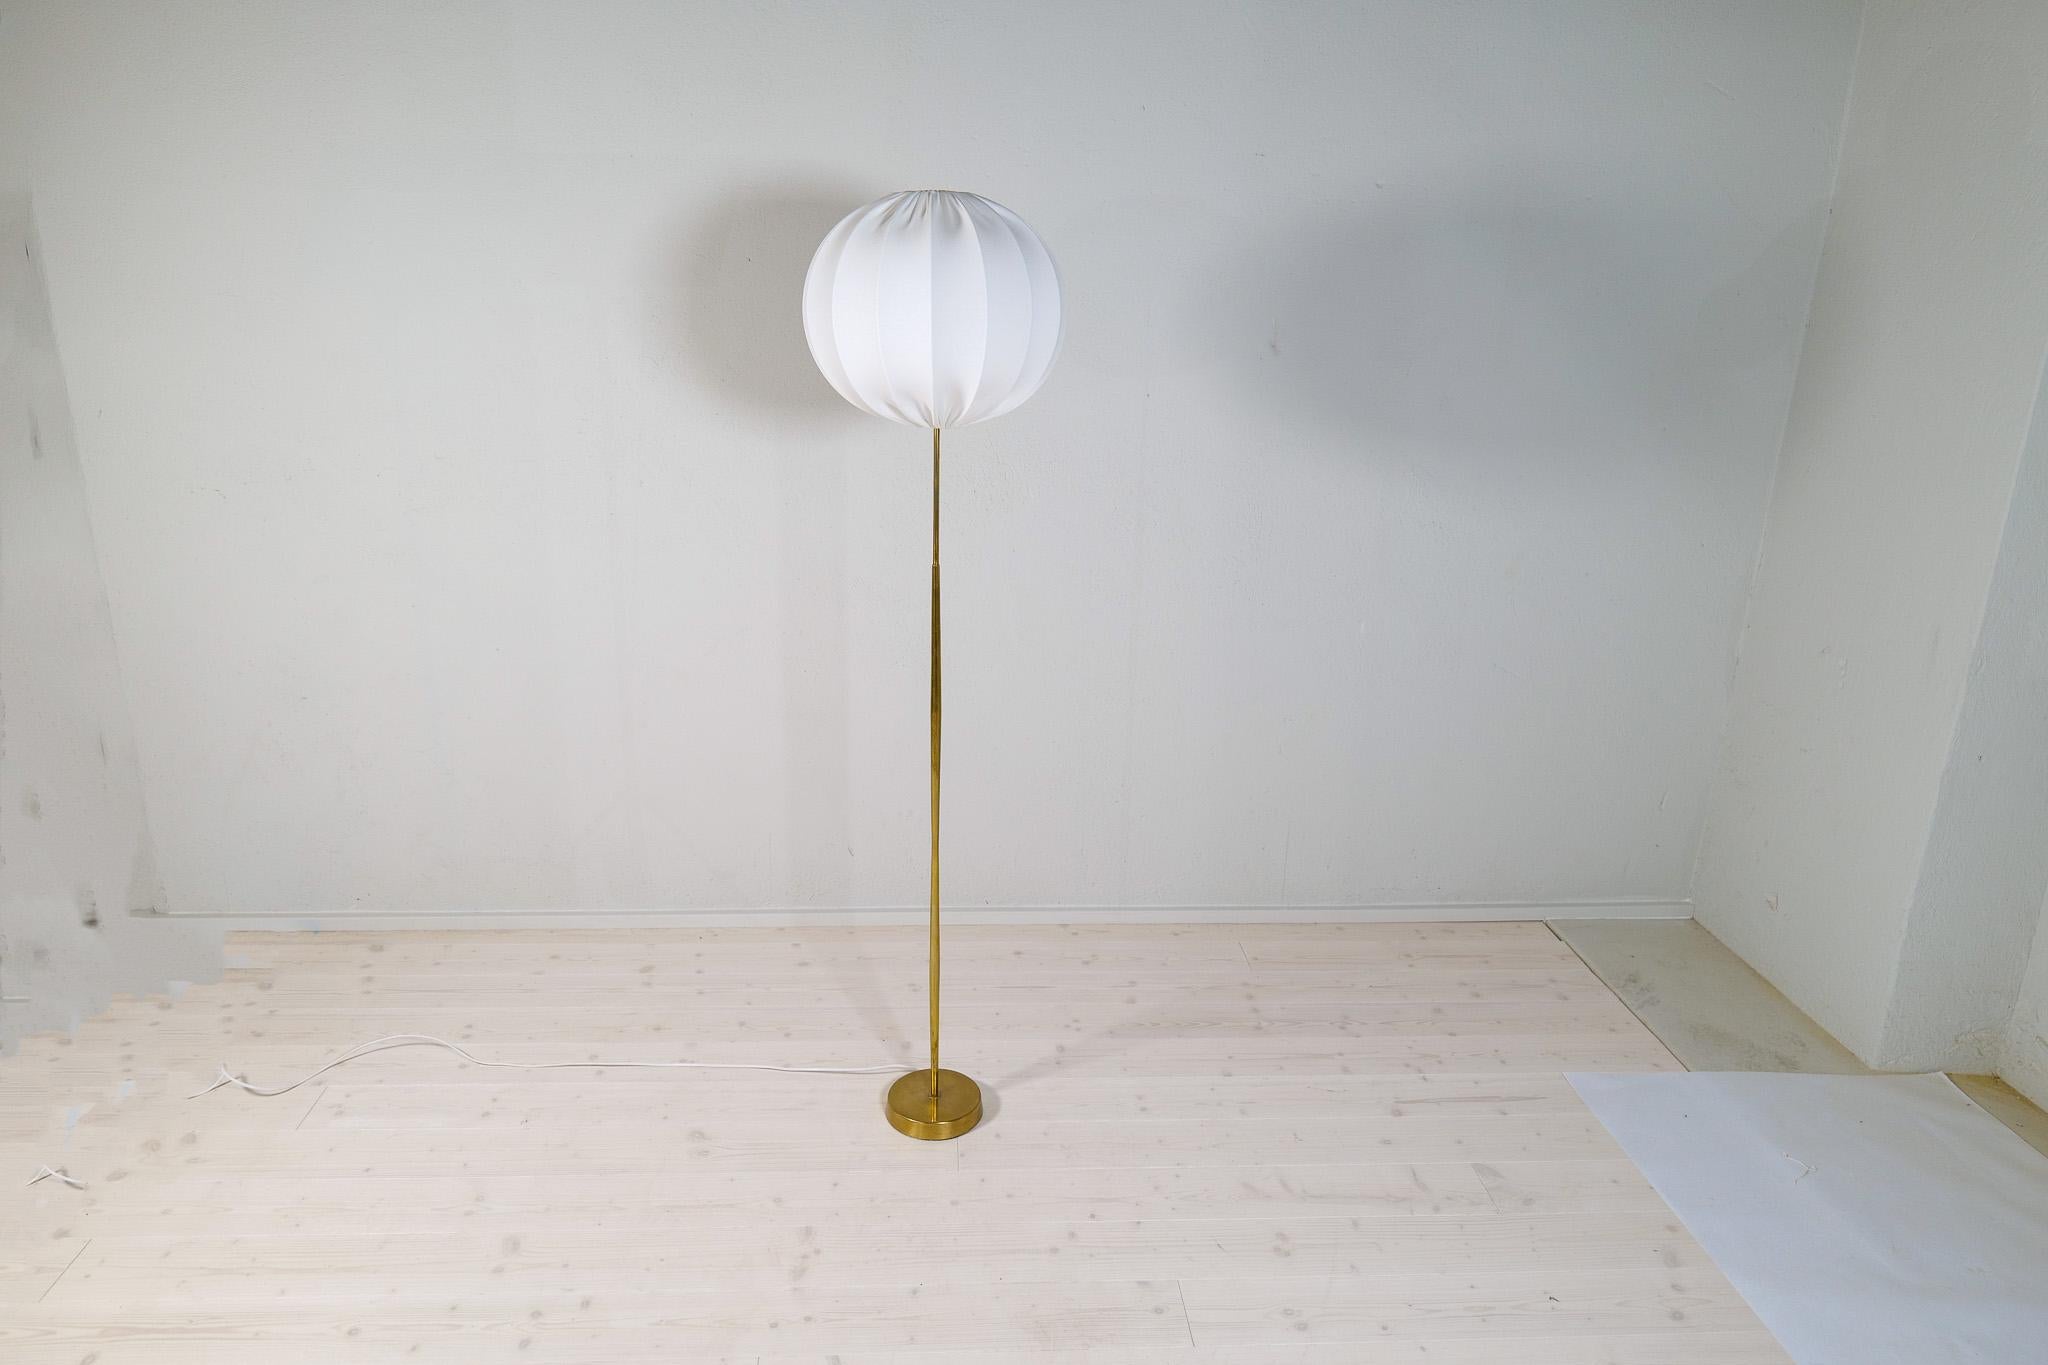 Swedish Midcentury Modern ASEA Brass Floor Lamp with Round Cotton Shade, Sweden, 1960s For Sale